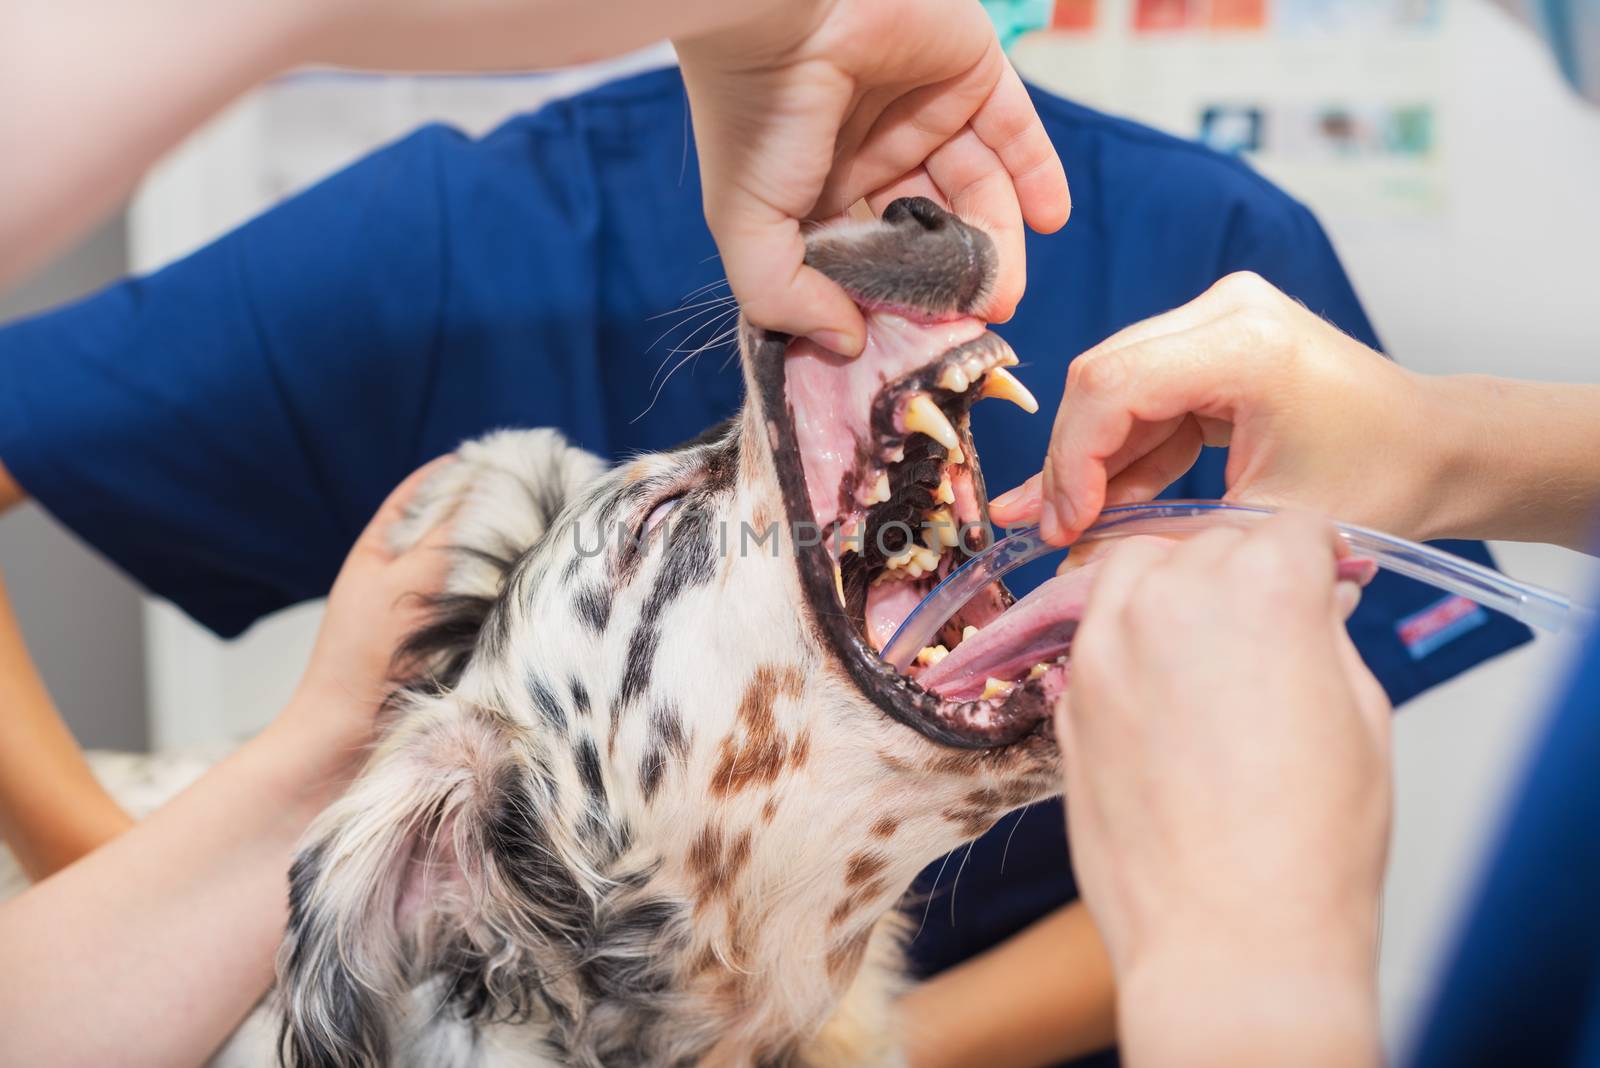 Dog intubated in surgery room of veterinary clinic